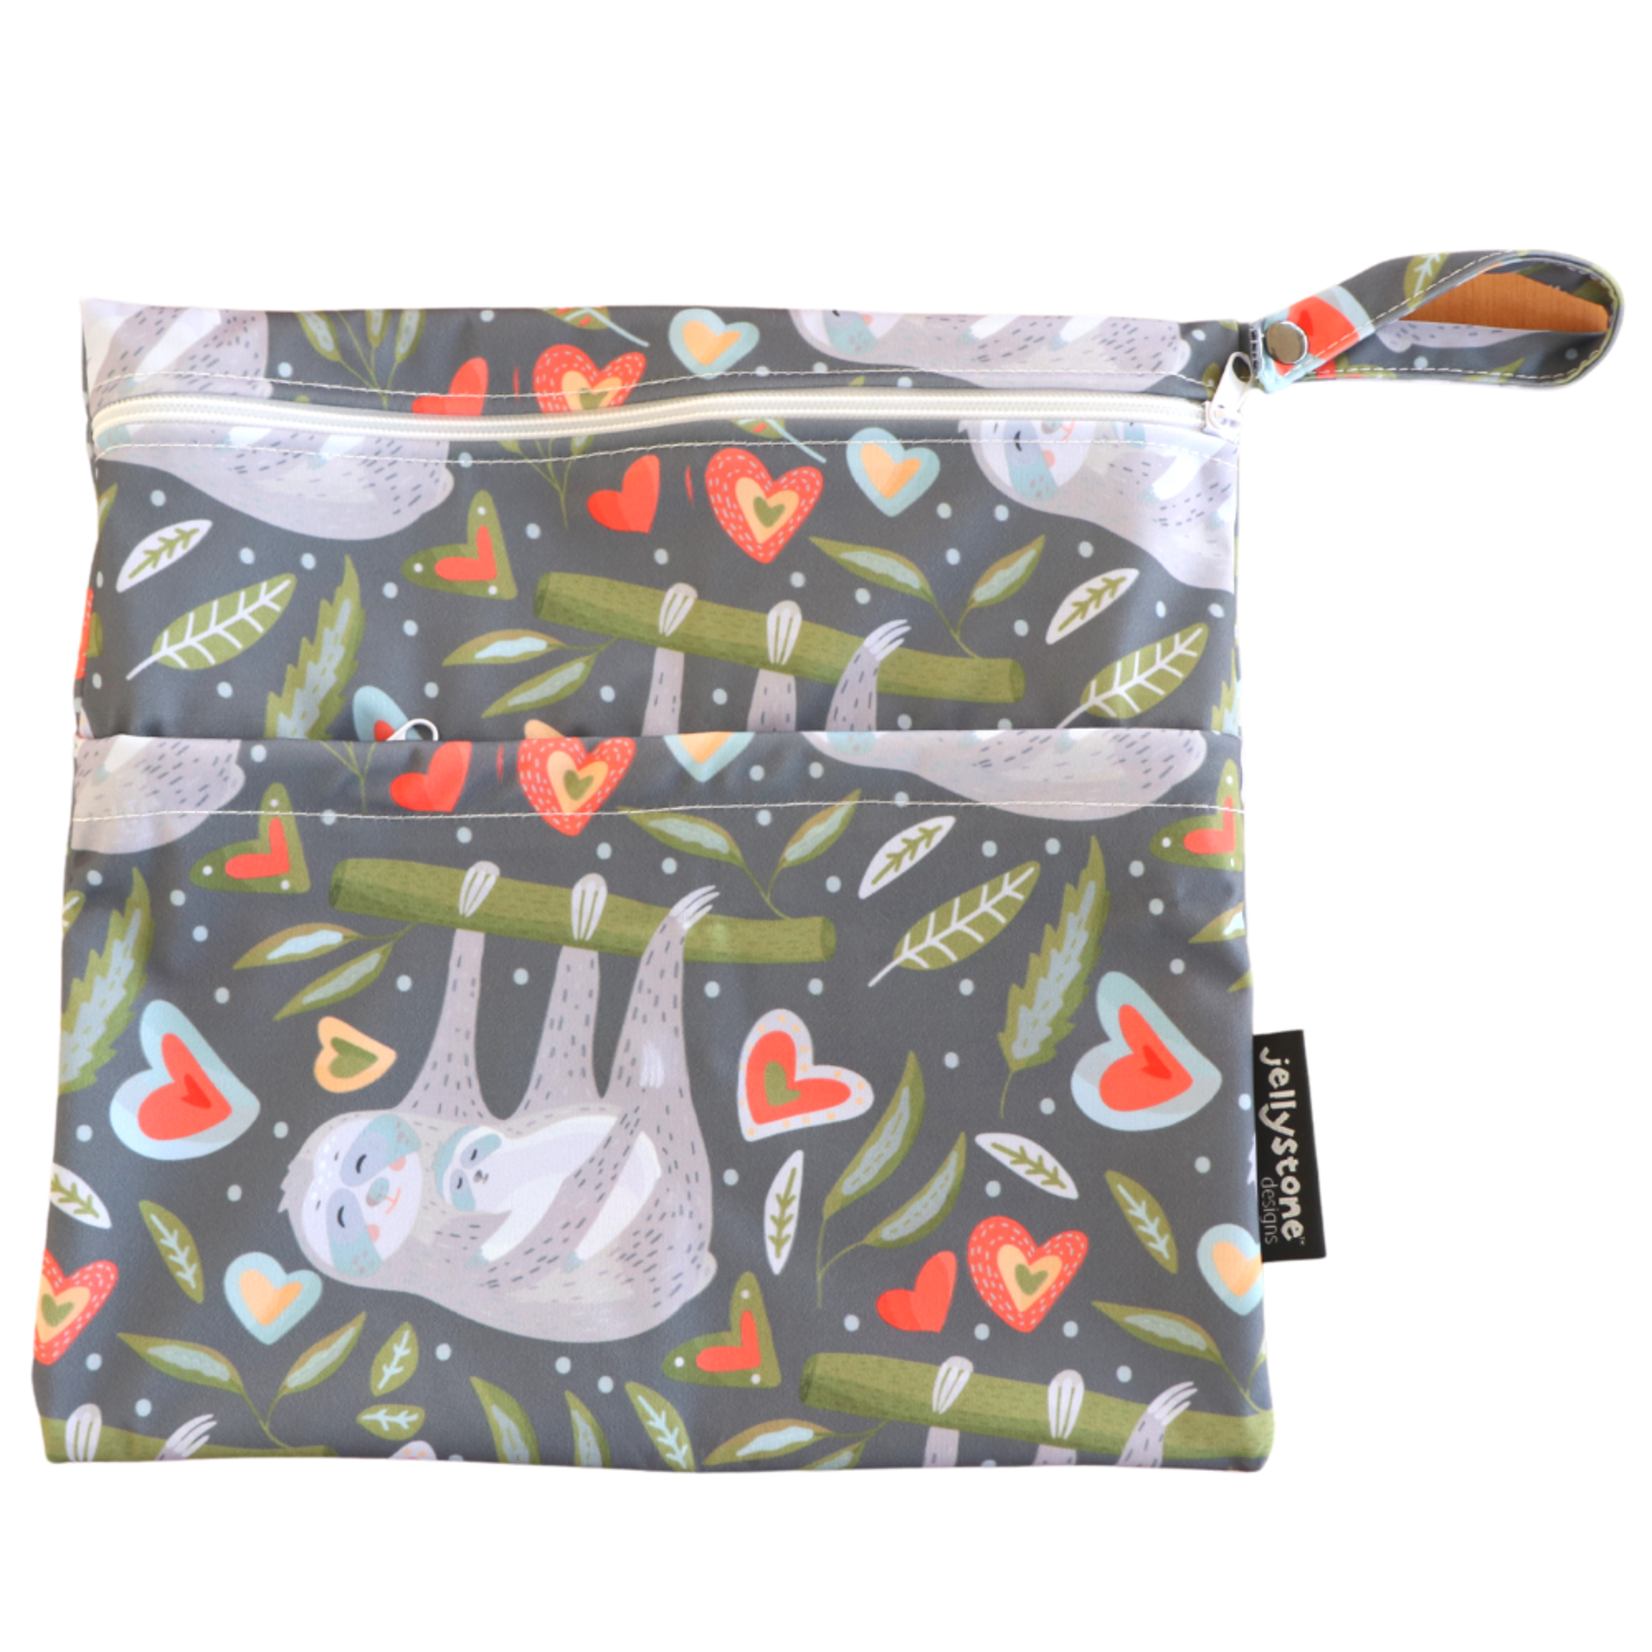 Jellystone Designs JELLYSTONE WET BAGIntroducing Jellystone Design's new wet bag for all your on-the-go changing needs!   Transport your dry and wet cloth nappies hygienically and with ease with one of our wet bags. They help contain odours and leakages, keeping your bag fr